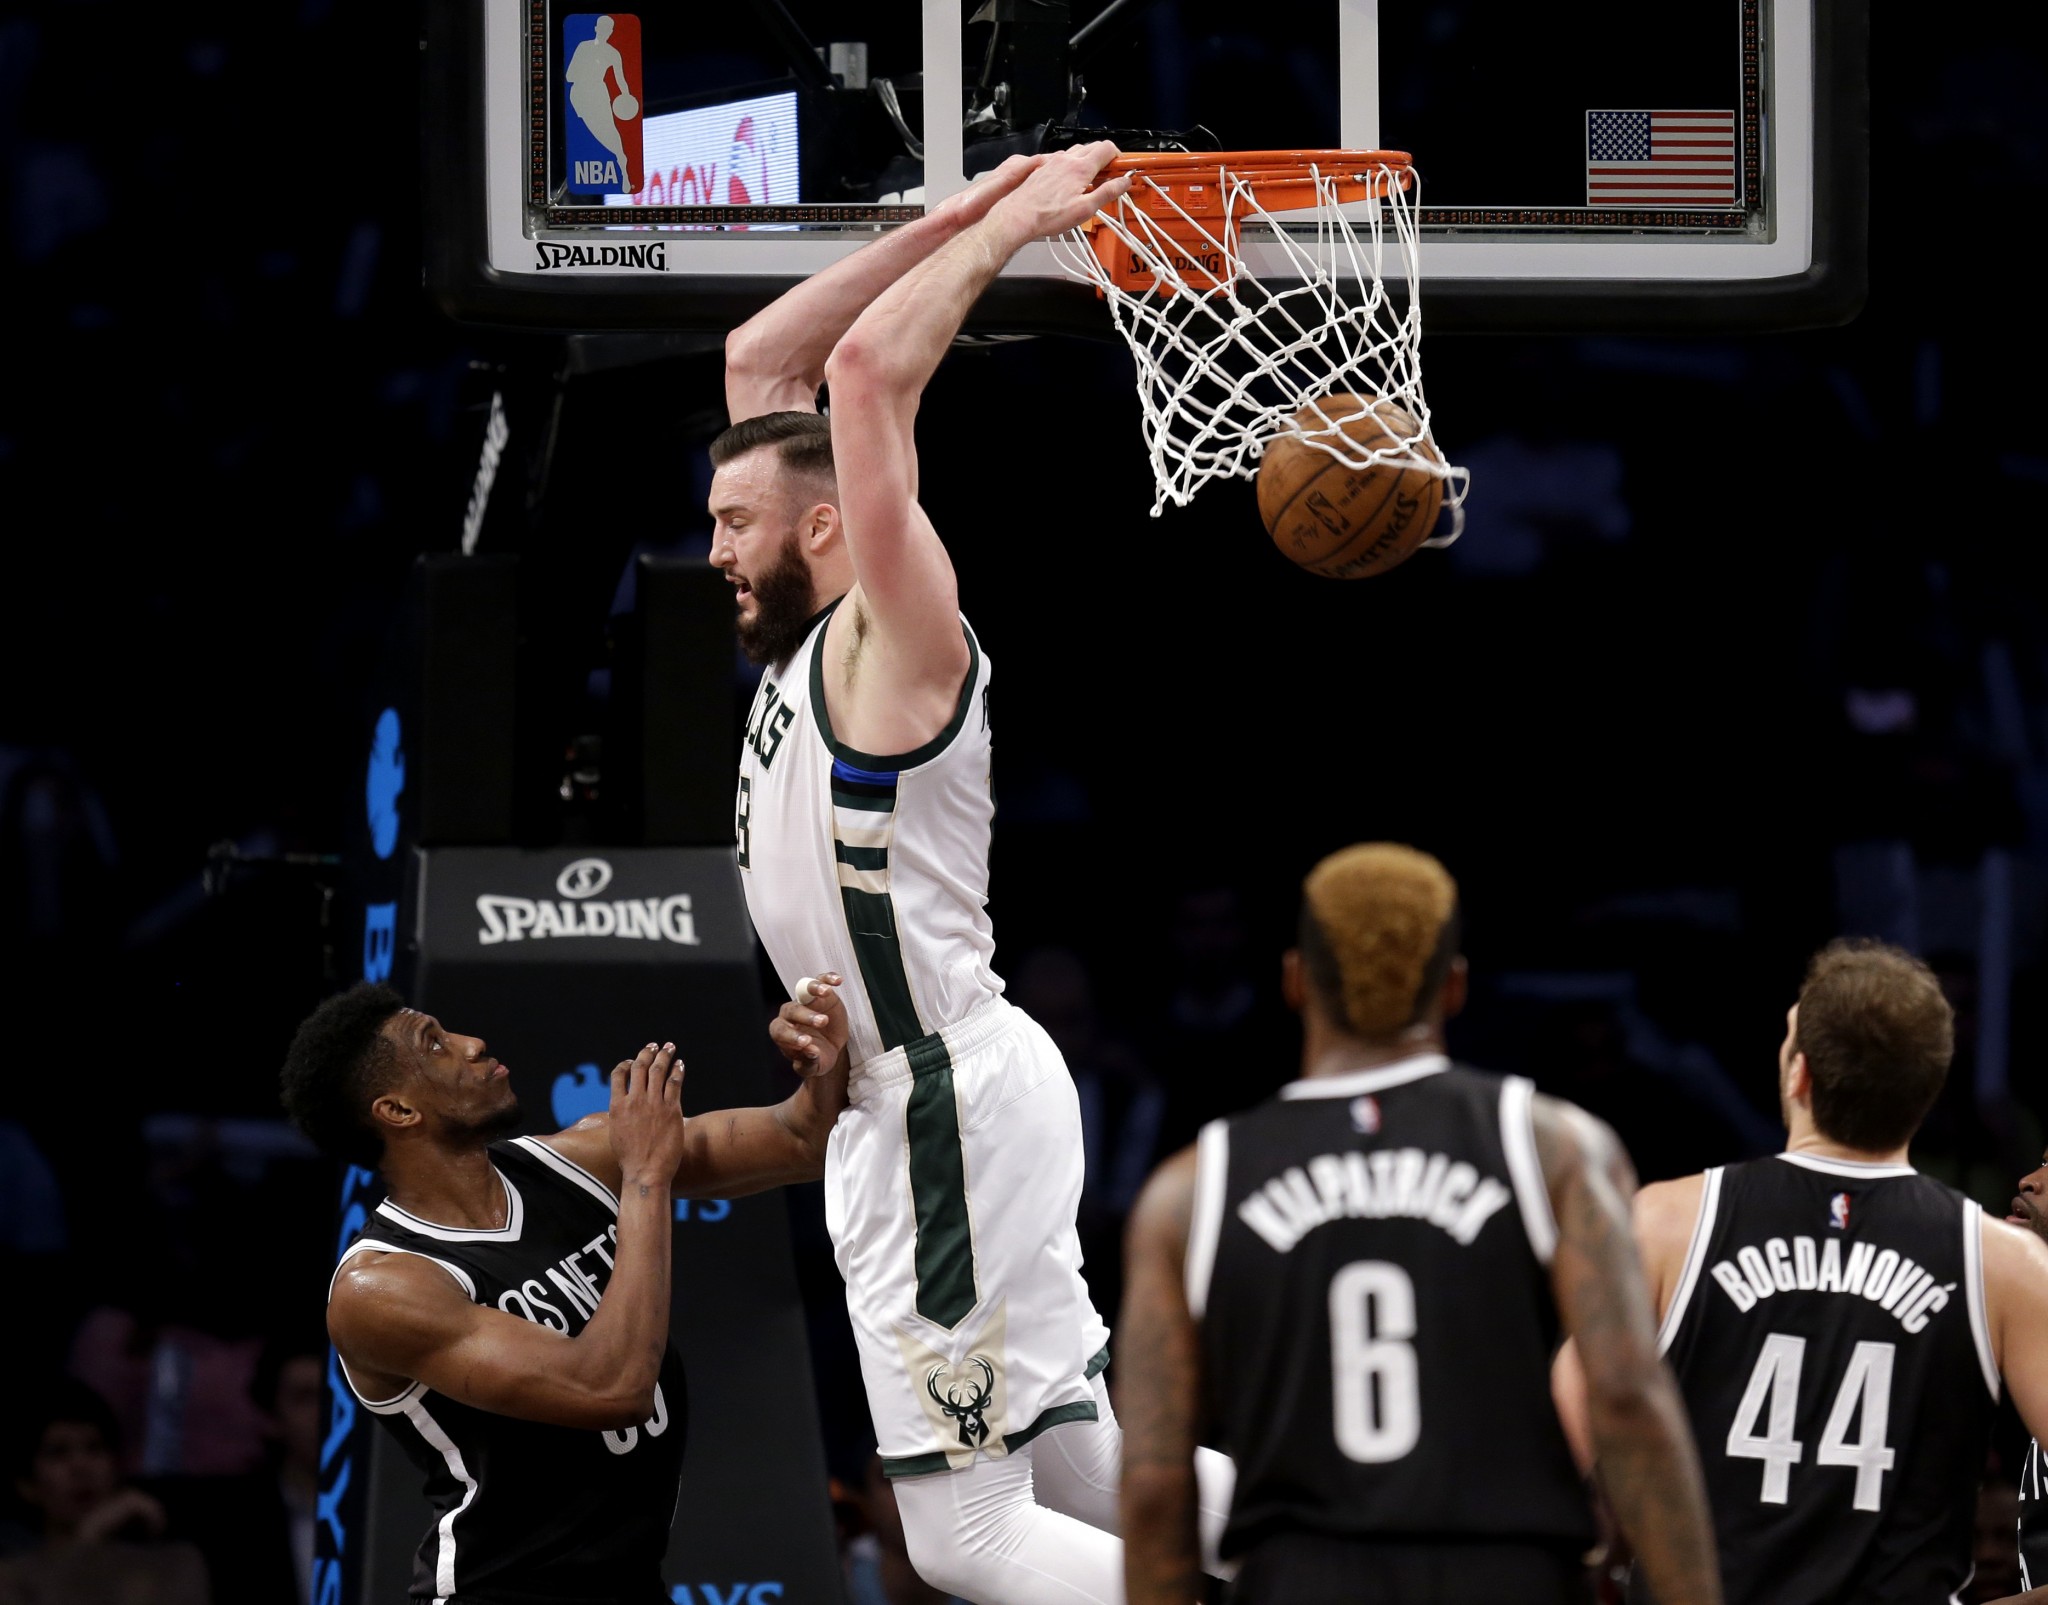 Miles Plumlee throws down a reverse dunk in front of Thaddeus Young during a March 2016 Bucks-Nets game. (AP/Seth Wenig)